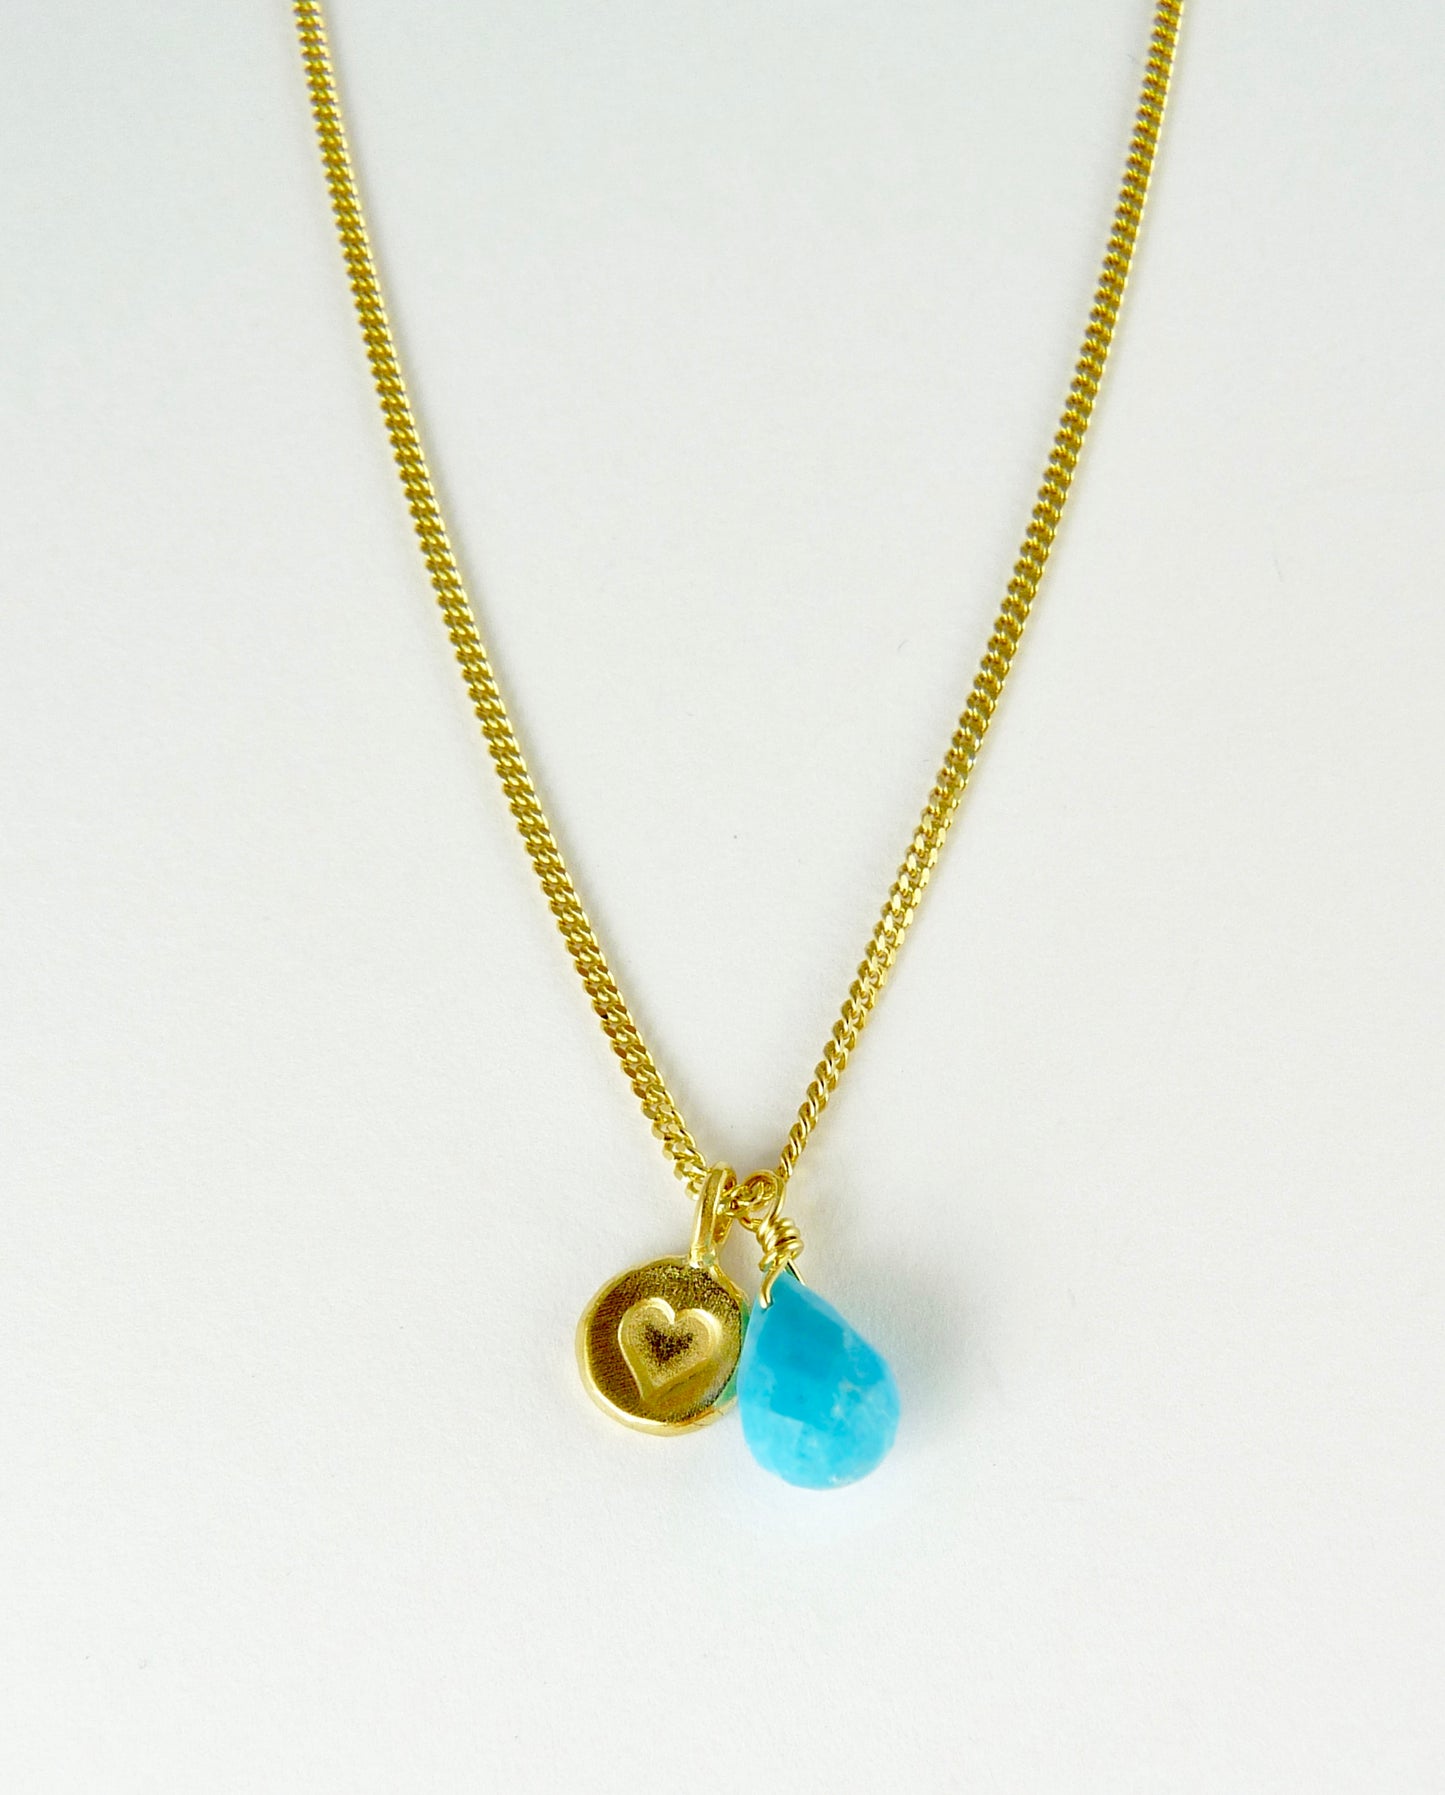 Heart and Turquoise necklace